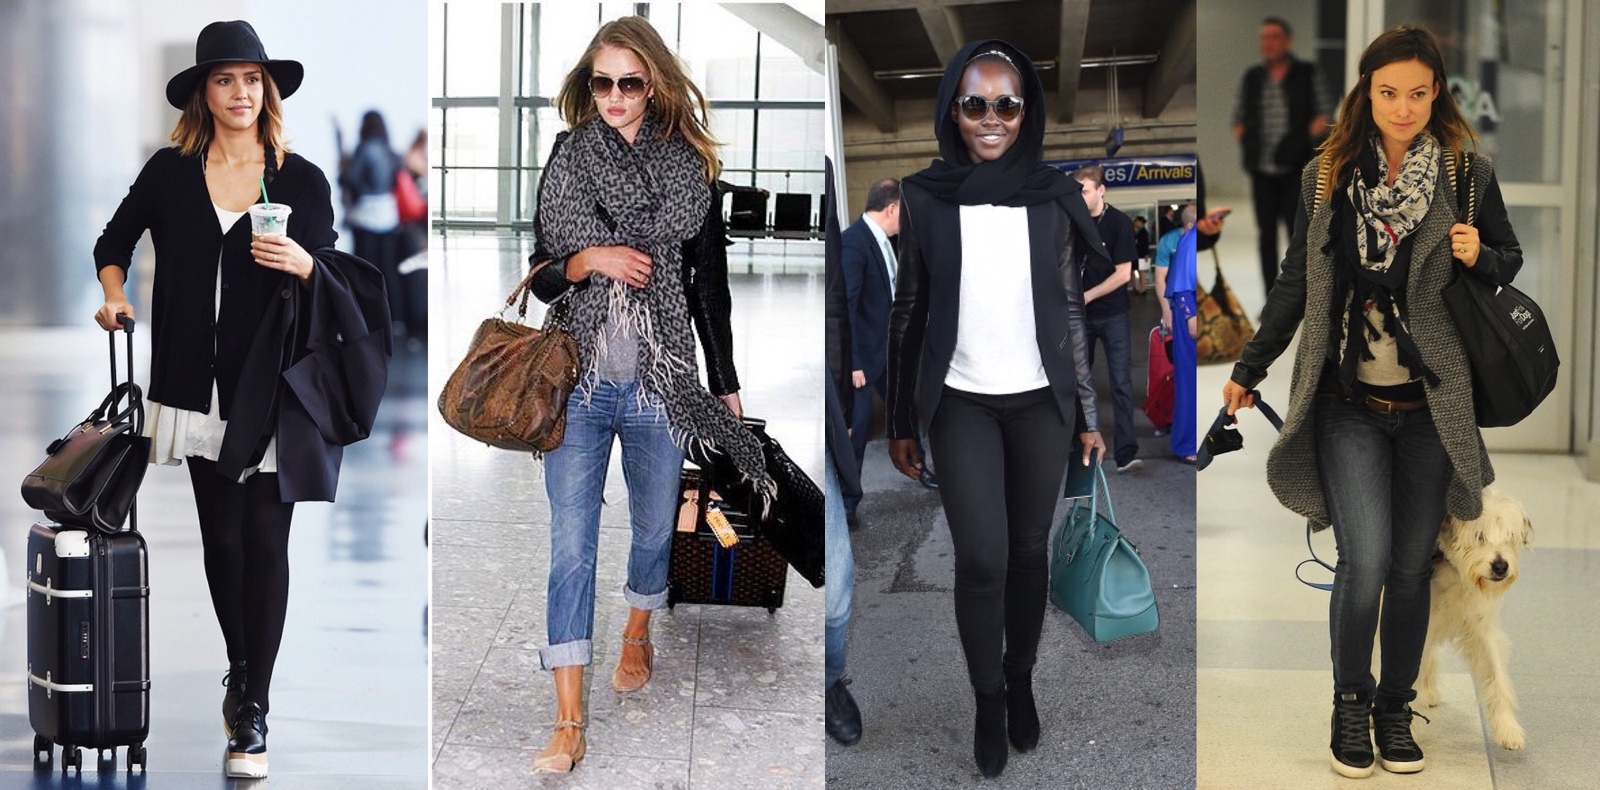 Inspired by: Airport Style - Fashion Schlub